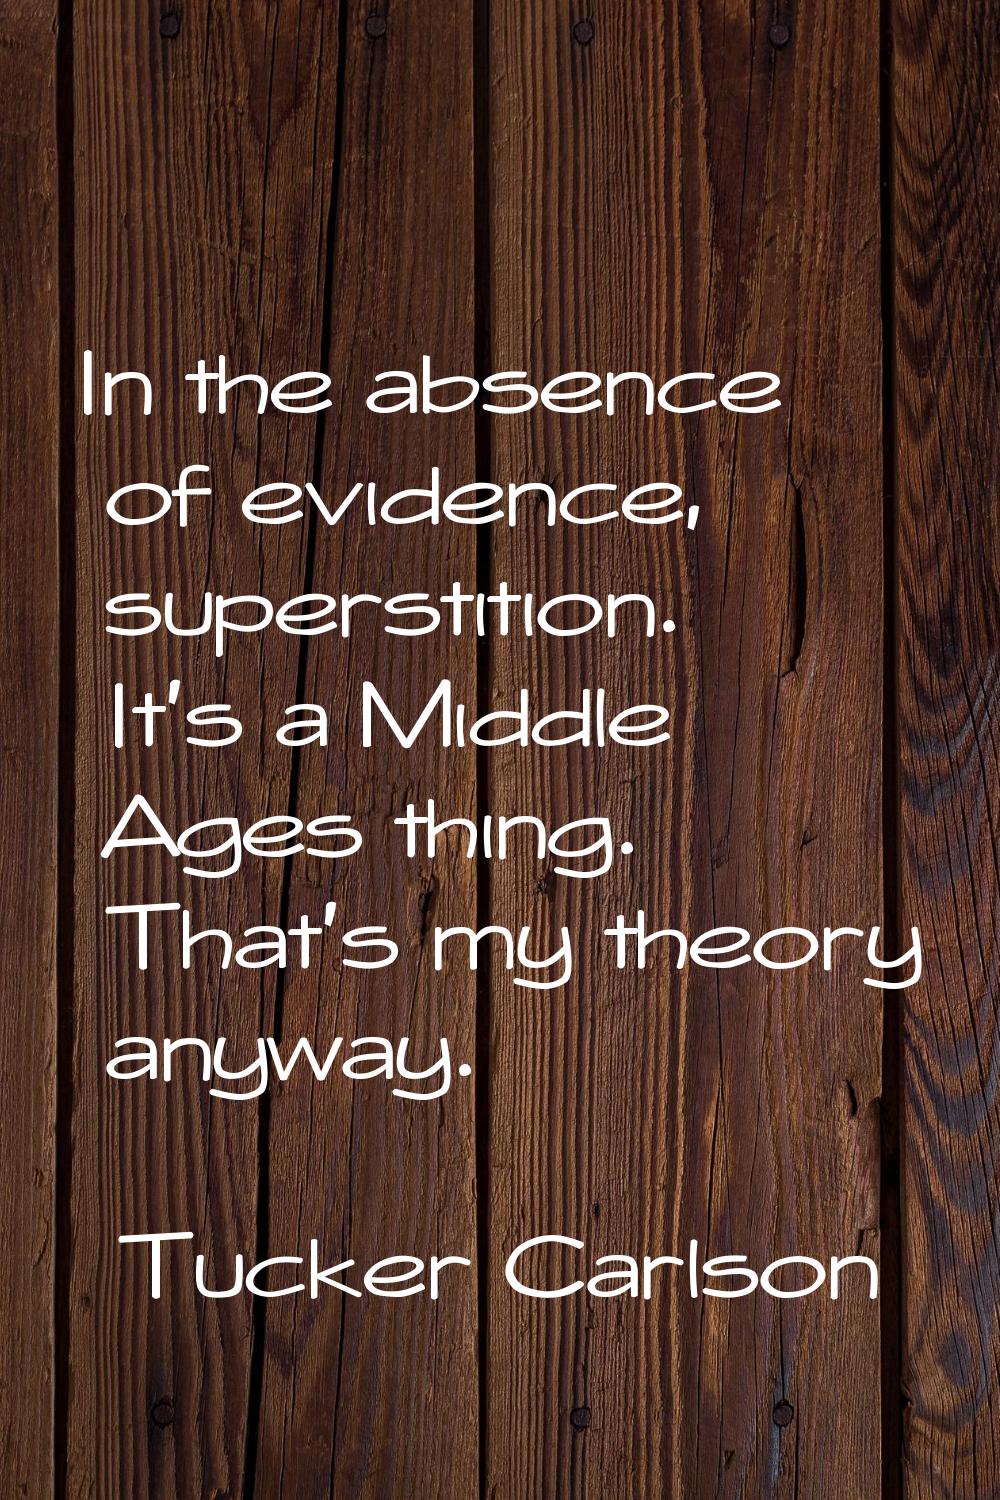 In the absence of evidence, superstition. It's a Middle Ages thing. That's my theory anyway.